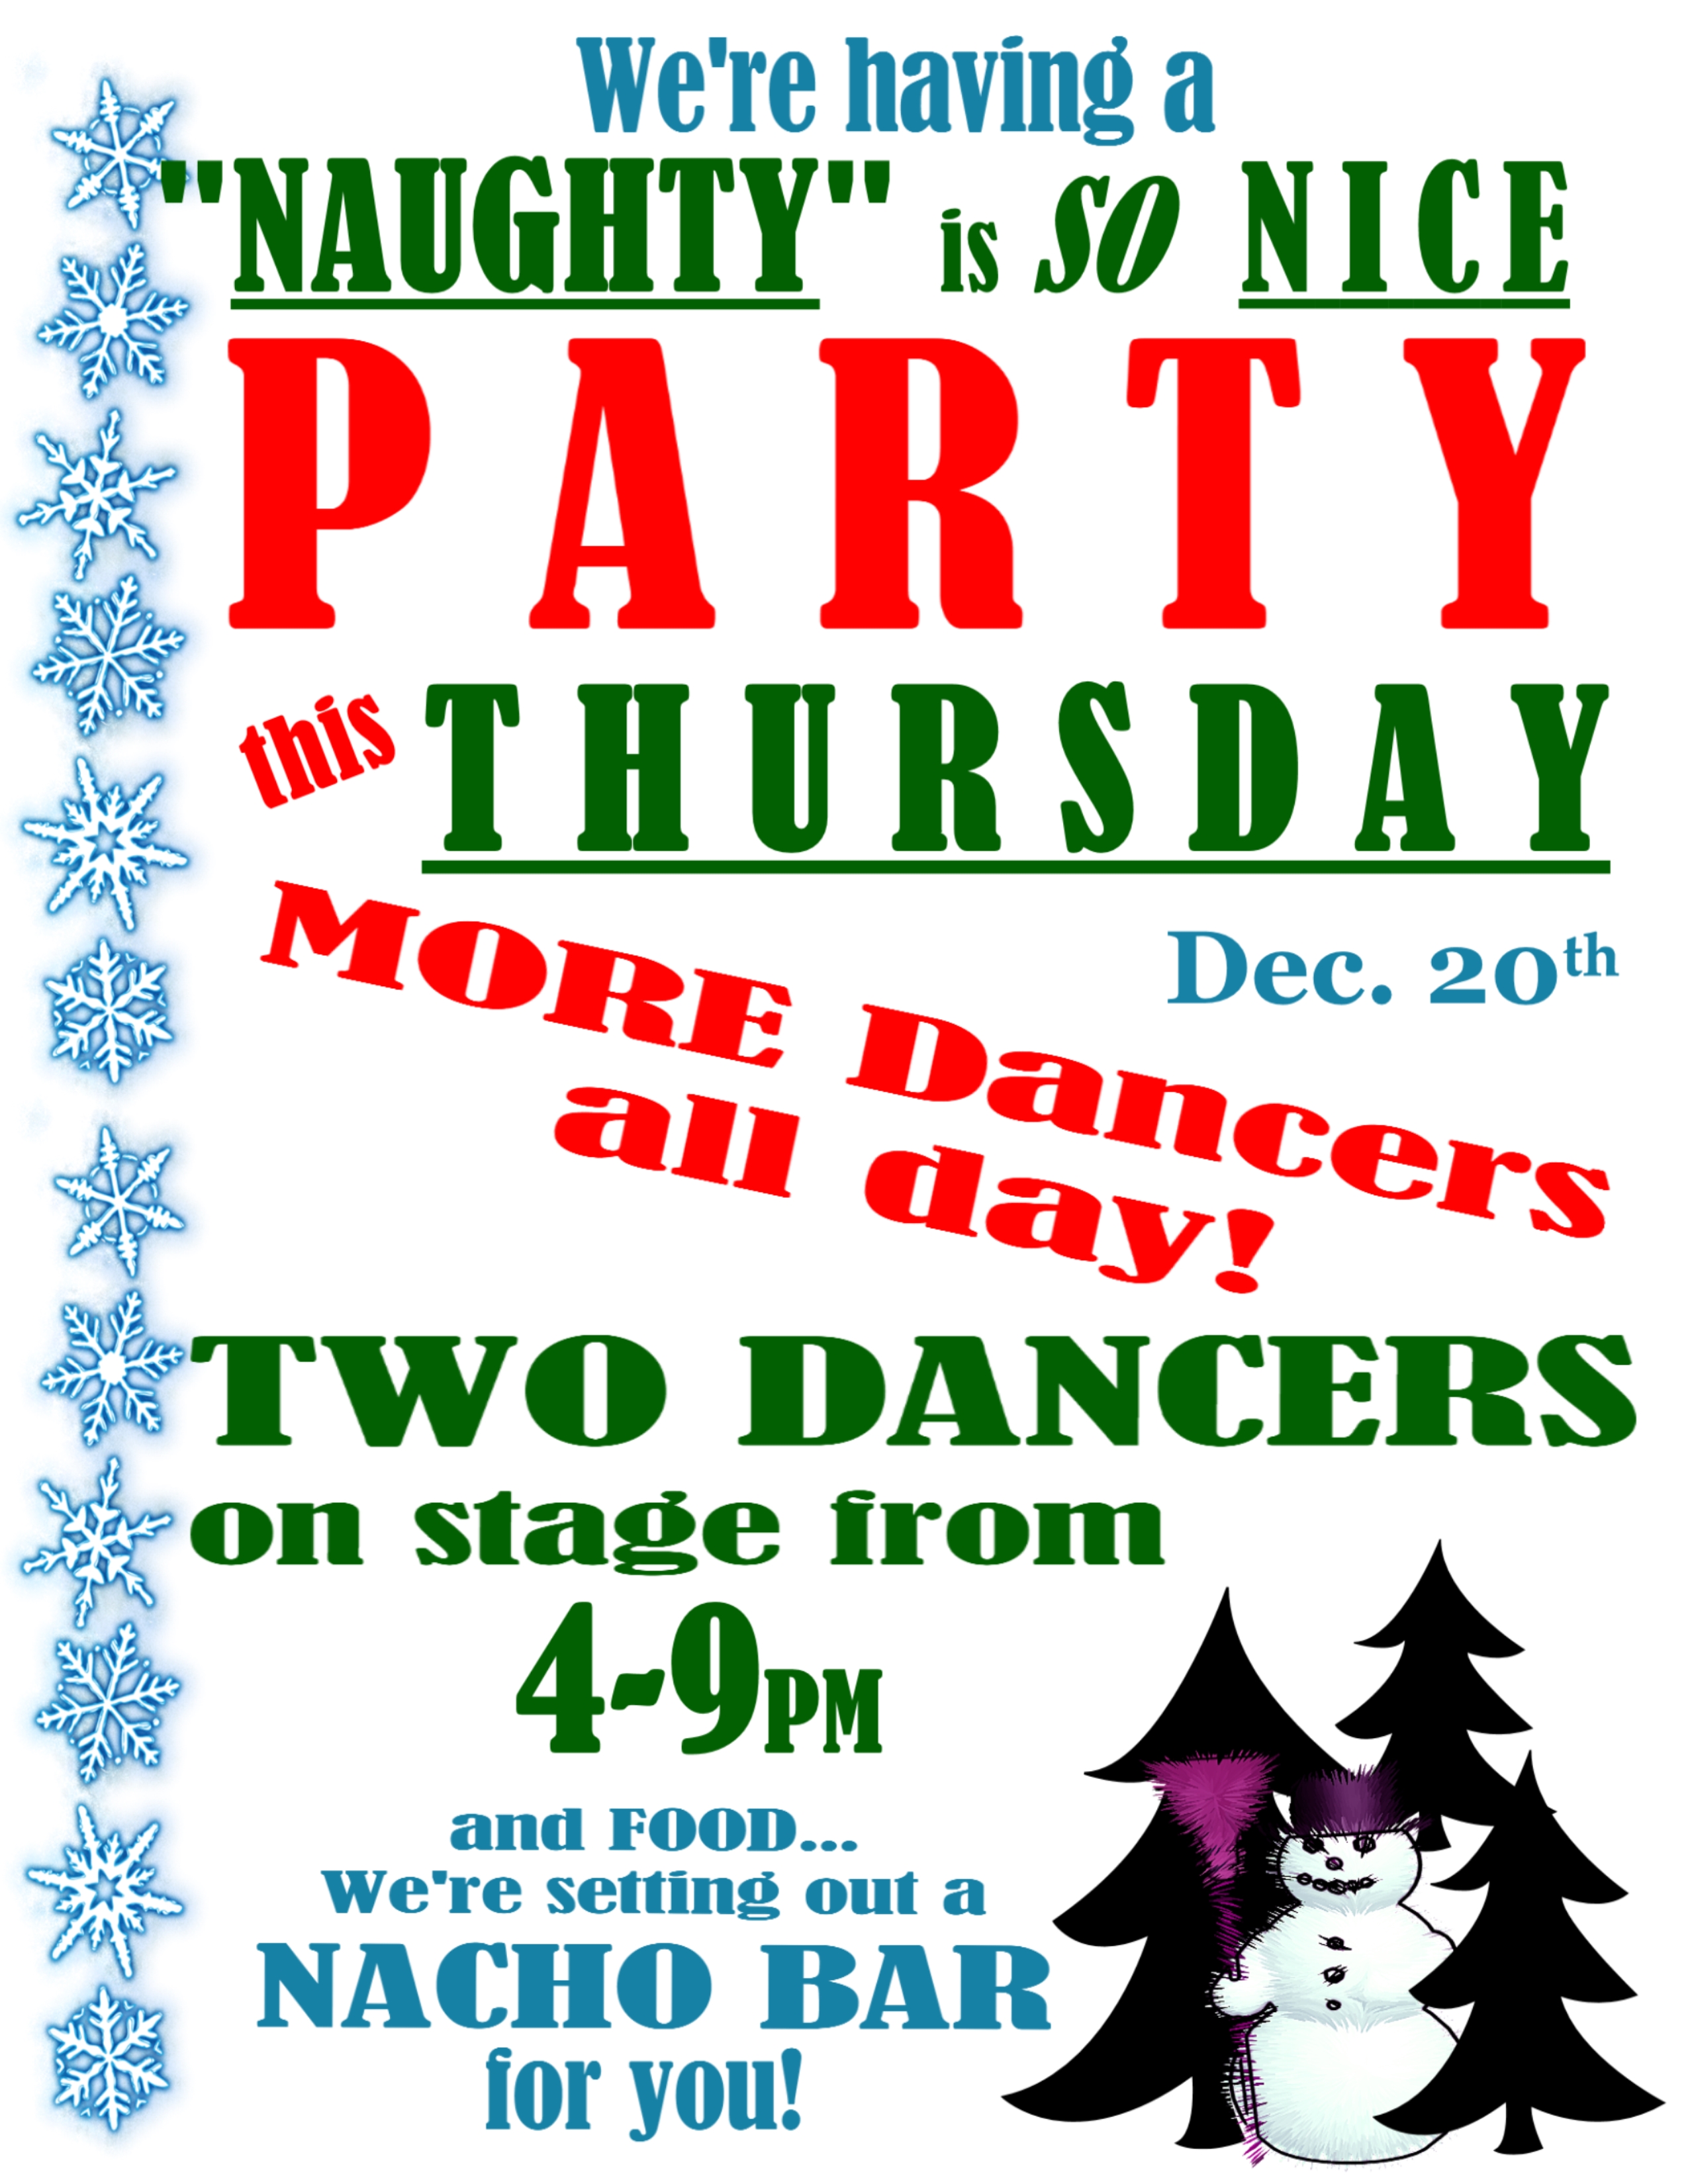 Thursday is our Christmas Party